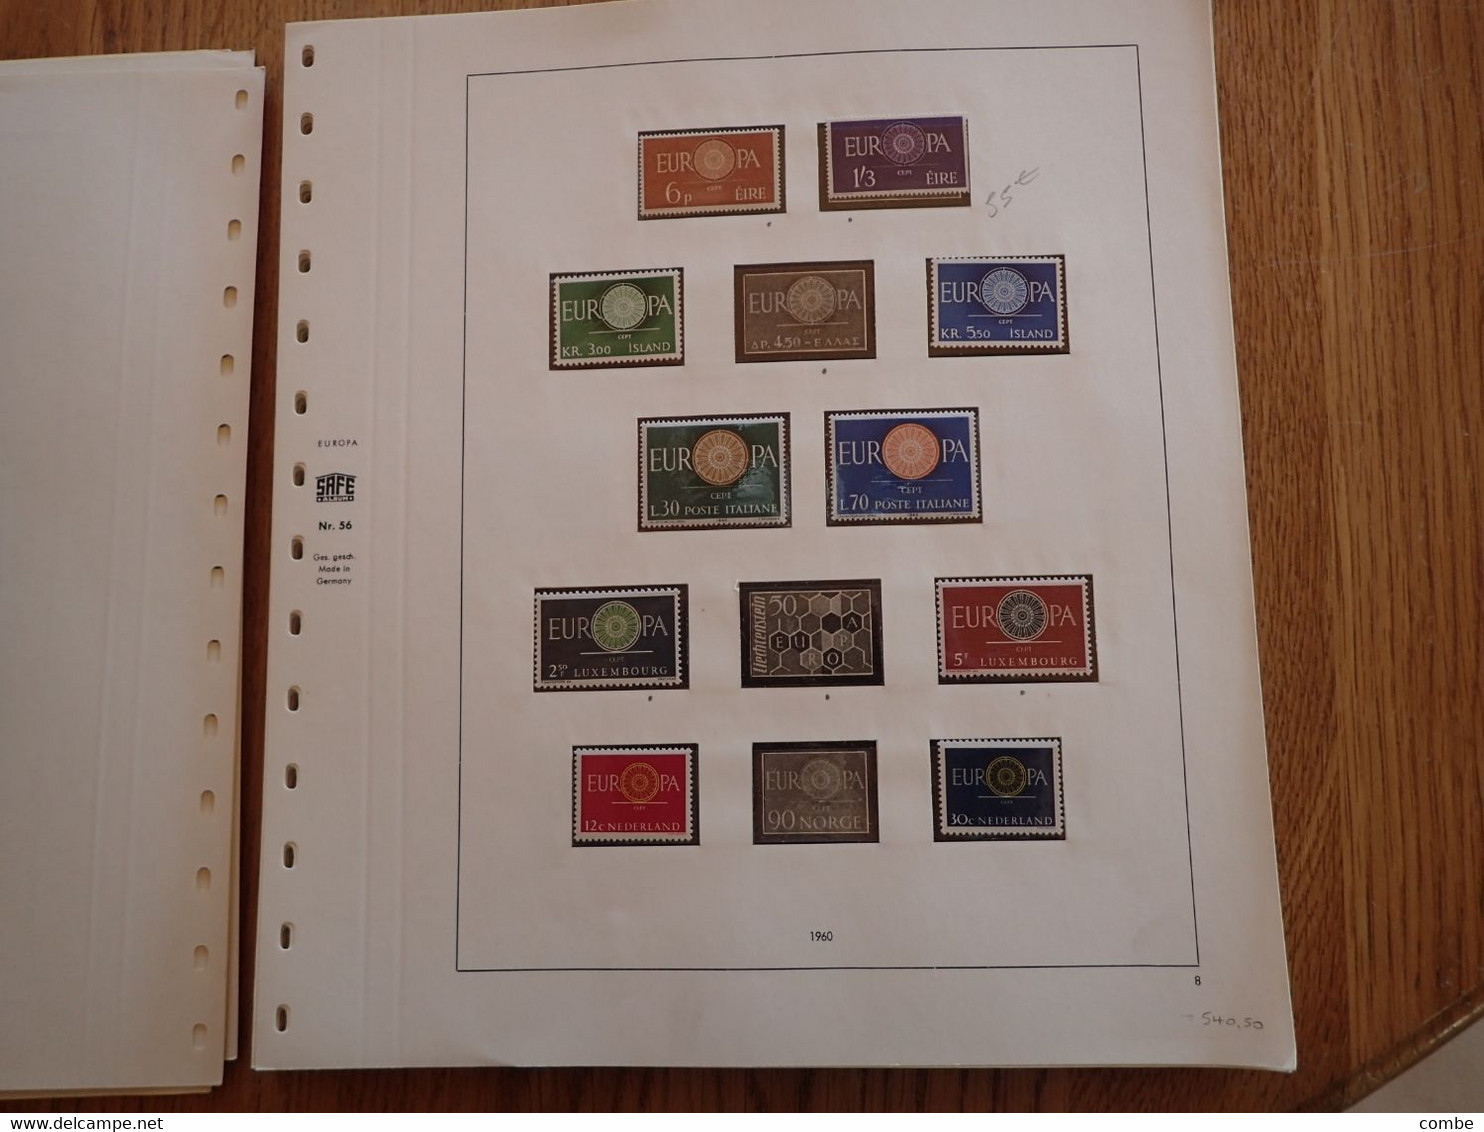 COLLECTION. EUROPA. TIMBRES NEUFS MNH. SUR FEUILLES SAFE. 42 SCANS. COTE ENORME. DONT CHYPRE 1963. Yv 217/219/ 15